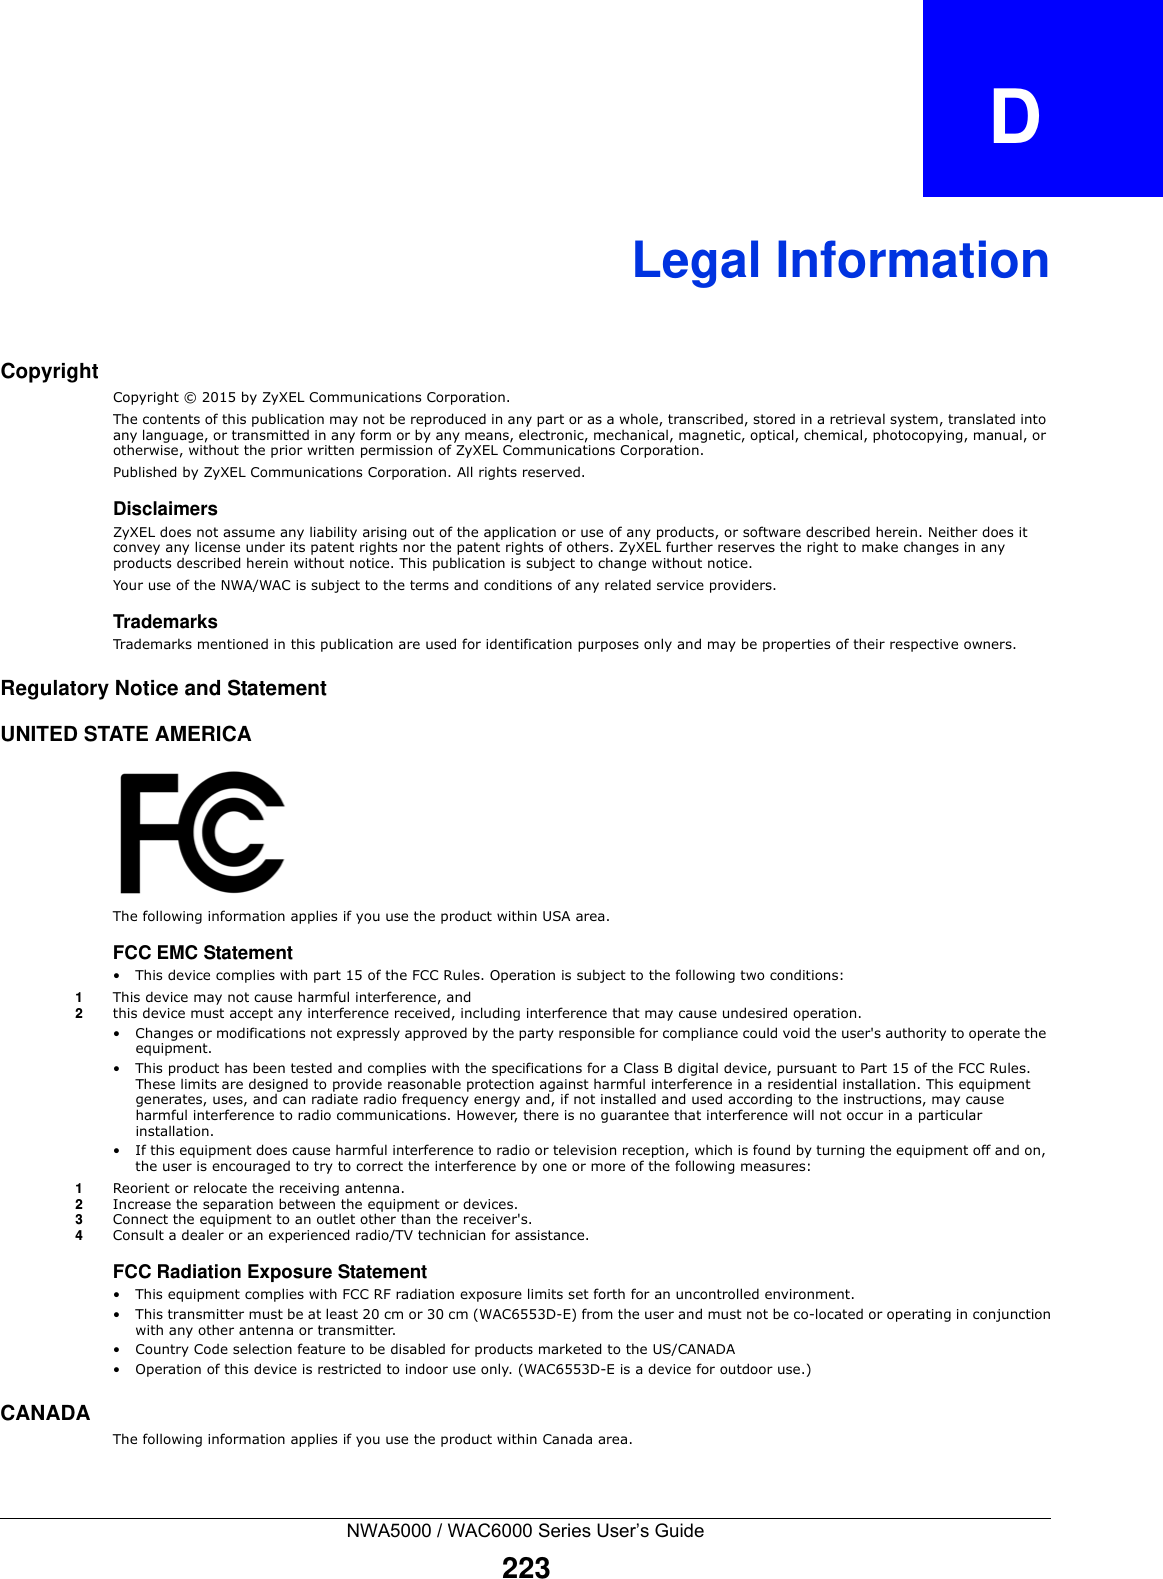 NWA5000 / WAC6000 Series User’s Guide223APPENDIX   DLegal InformationCopyrightCopyright © 2015 by ZyXEL Communications Corporation.The contents of this publication may not be reproduced in any part or as a whole, transcribed, stored in a retrieval system, translated into any language, or transmitted in any form or by any means, electronic, mechanical, magnetic, optical, chemical, photocopying, manual, or otherwise, without the prior written permission of ZyXEL Communications Corporation.Published by ZyXEL Communications Corporation. All rights reserved.DisclaimersZyXEL does not assume any liability arising out of the application or use of any products, or software described herein. Neither does it convey any license under its patent rights nor the patent rights of others. ZyXEL further reserves the right to make changes in any products described herein without notice. This publication is subject to change without notice.Your use of the NWA/WAC is subject to the terms and conditions of any related service providers. TrademarksTrademarks mentioned in this publication are used for identification purposes only and may be properties of their respective owners.Regulatory Notice and StatementUNITED STATE AMERICAThe following information applies if you use the product within USA area.FCC EMC Statement • This device complies with part 15 of the FCC Rules. Operation is subject to the following two conditions:1This device may not cause harmful interference, and 2this device must accept any interference received, including interference that may cause undesired operation.• Changes or modifications not expressly approved by the party responsible for compliance could void the user&apos;s authority to operate theequipment.• This product has been tested and complies with the specifications for a Class B digital device, pursuant to Part 15 of the FCC Rules.These limits are designed to provide reasonable protection against harmful interference in a residential installation. This equipment generates, uses, and can radiate radio frequency energy and, if not installed and used according to the instructions, may cause harmful interference to radio communications. However, there is no guarantee that interference will not occur in a particular installation. • If this equipment does cause harmful interference to radio or television reception, which is found by turning the equipment off and on,the user is encouraged to try to correct the interference by one or more of the following measures:1Reorient or relocate the receiving antenna.2Increase the separation between the equipment or devices.3Connect the equipment to an outlet other than the receiver&apos;s.4Consult a dealer or an experienced radio/TV technician for assistance.FCC Radiation Exposure Statement• This equipment complies with FCC RF radiation exposure limits set forth for an uncontrolled environment.•This transmitter must be at least 20 cm or 30 cm (WAC6553D-E) from the user and must not be co-located or operating in conjunctionwith any other antenna or transmitter.• Country Code selection feature to be disabled for products marketed to the US/CANADA• Operation of this device is restricted to indoor use only. (WAC6553D-E is a device for outdoor use.)CANADAThe following information applies if you use the product within Canada area.